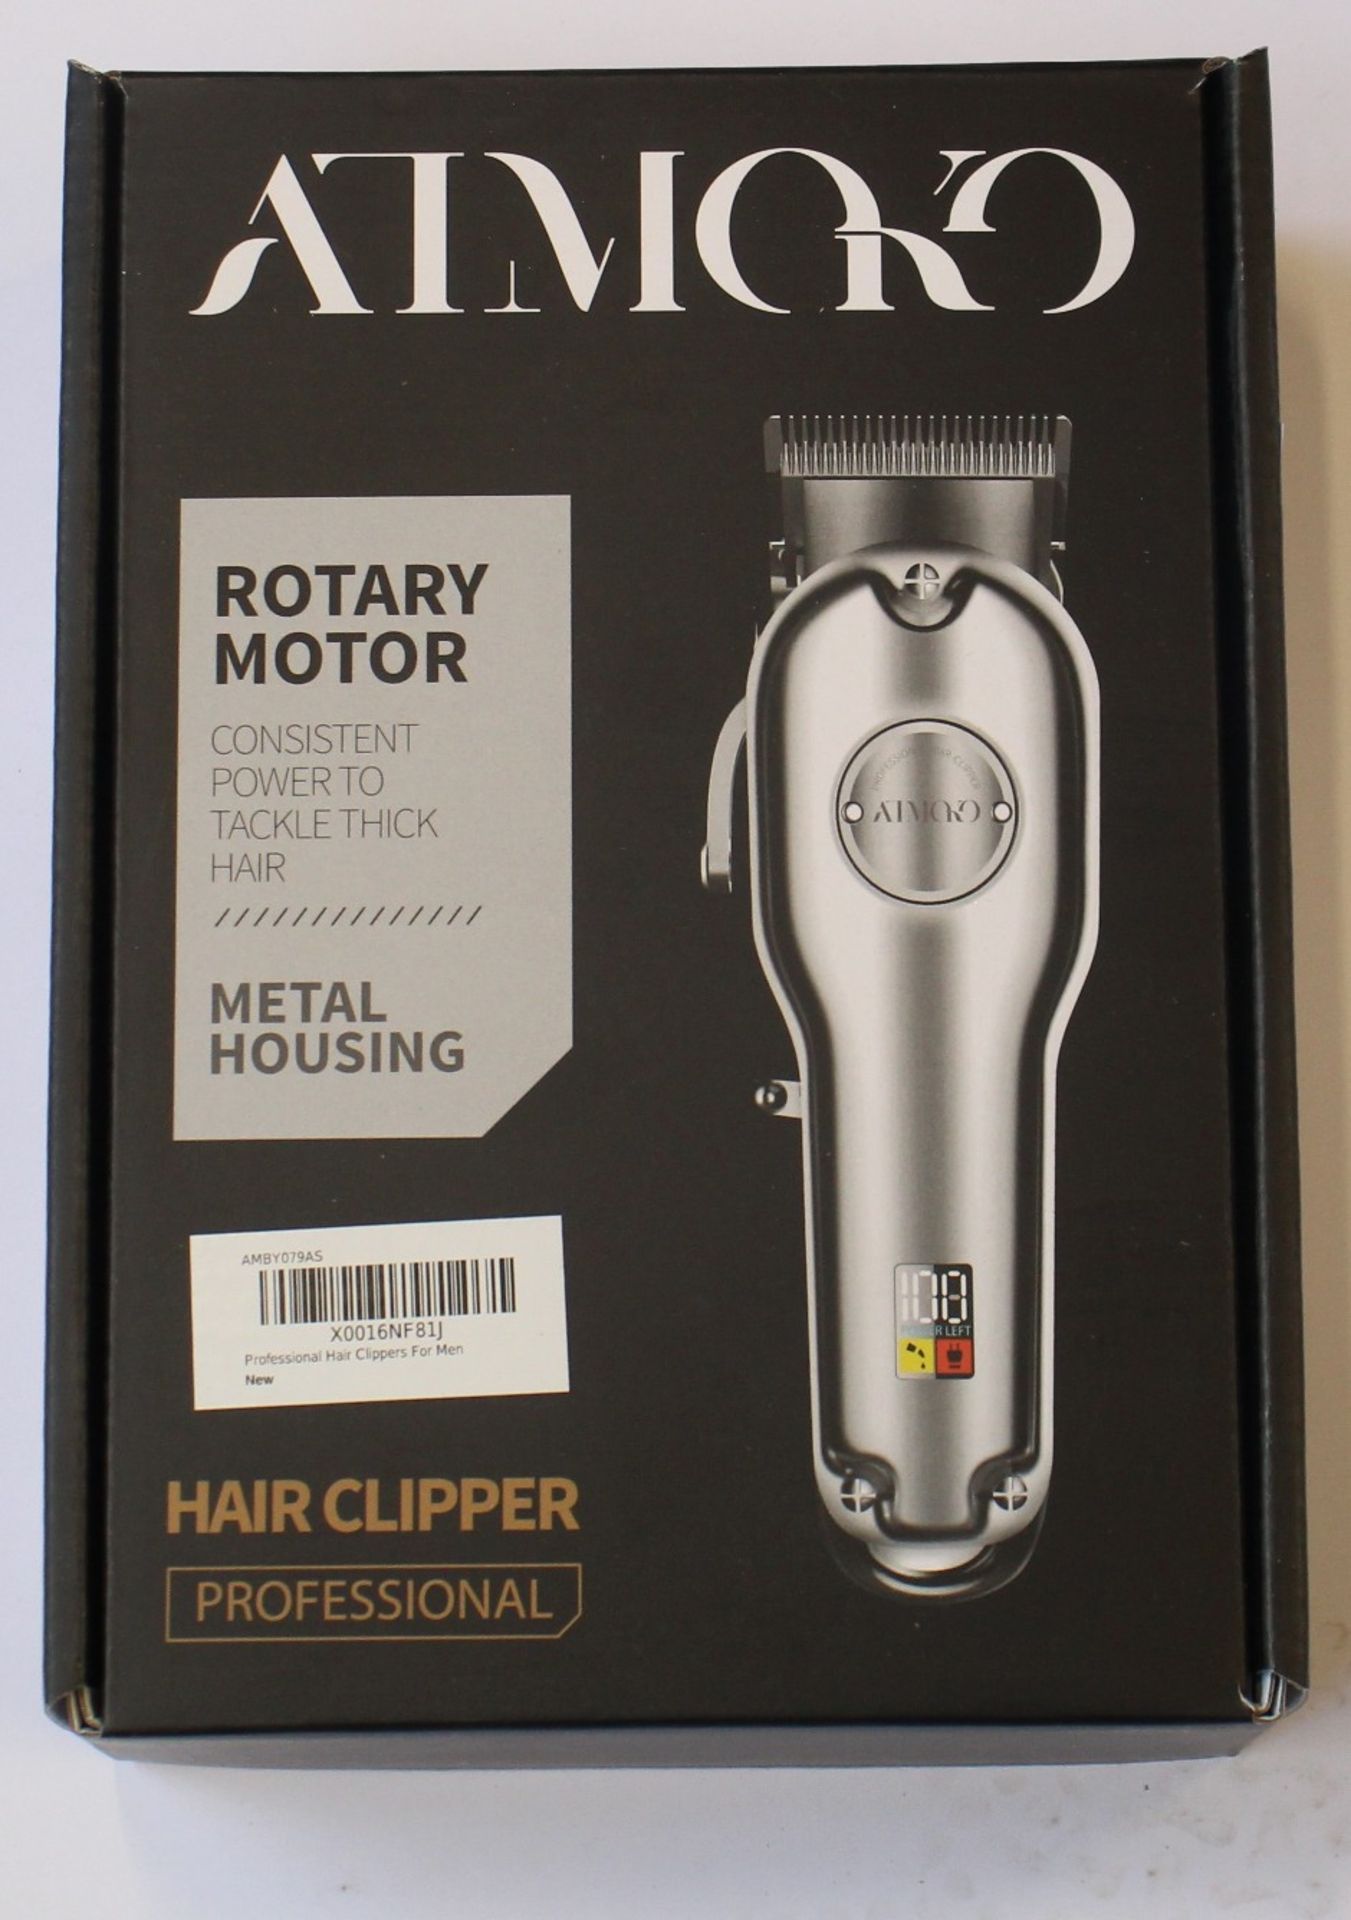 3 X BRAND NEW ATMORO CORDLESS HAIR CLIPPERS EBR